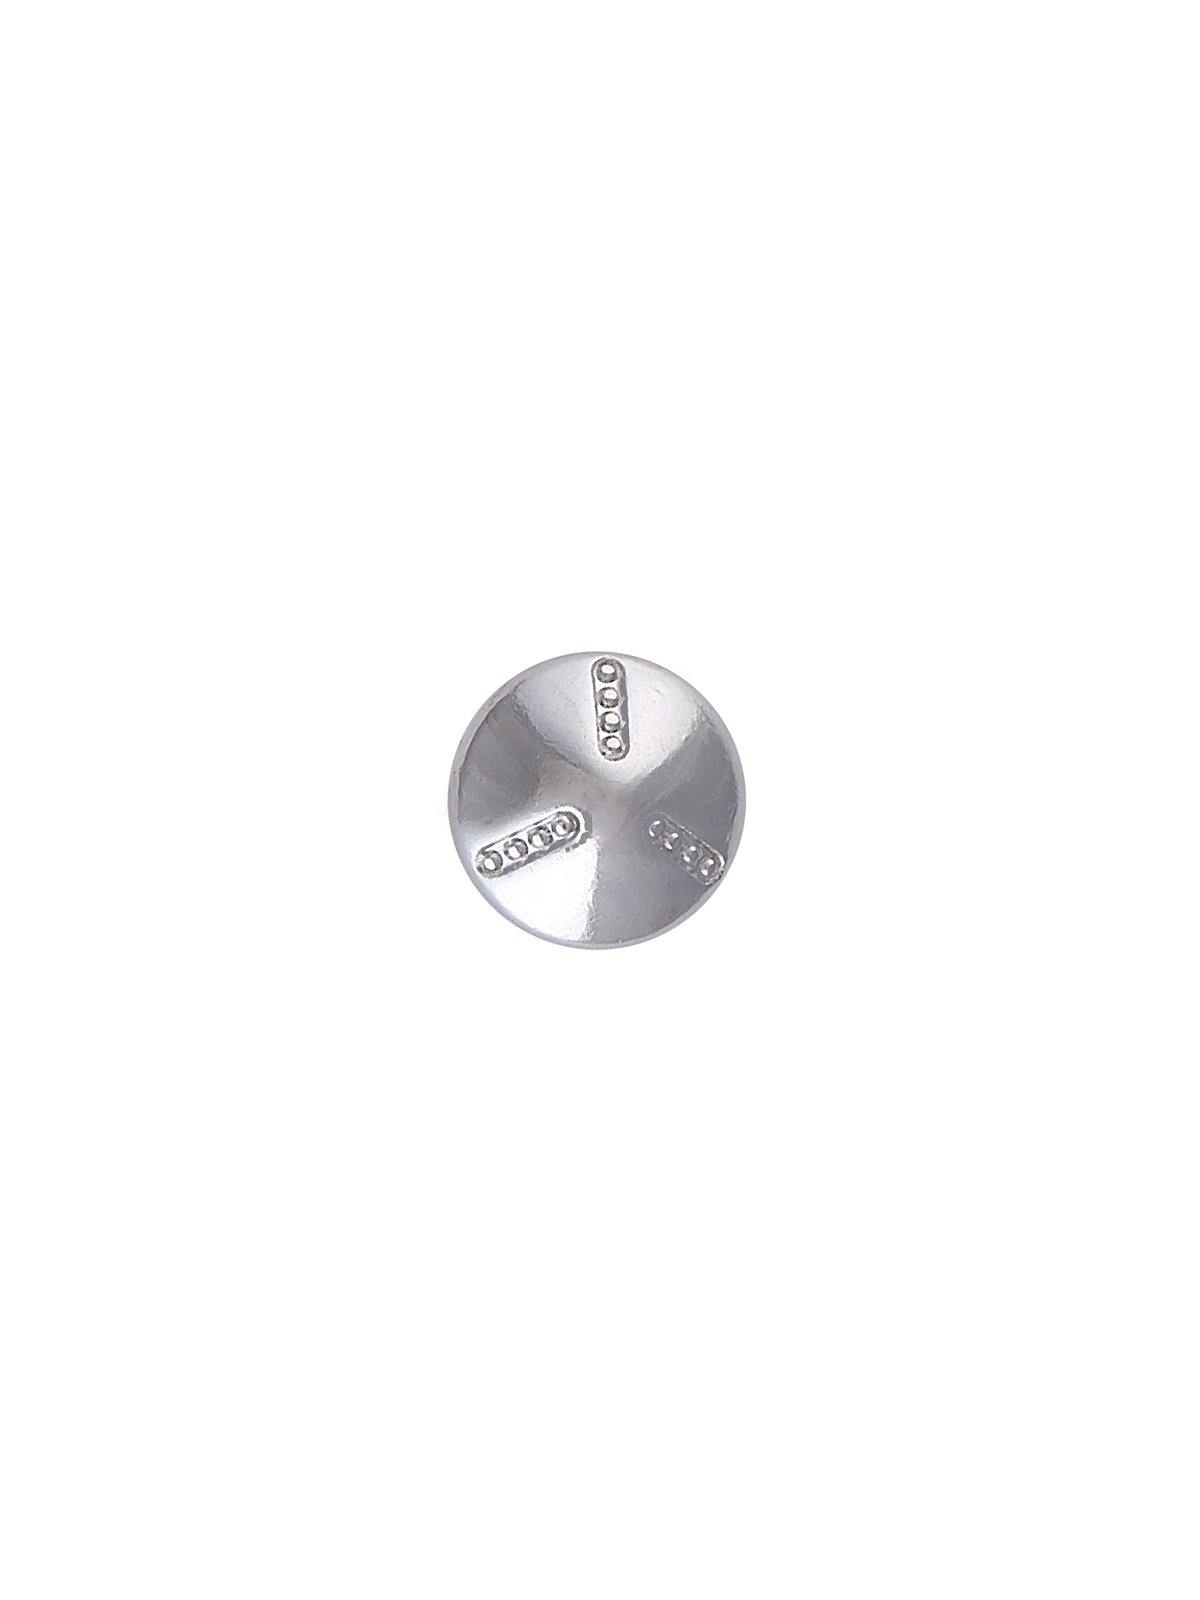 Classic Engraved Design 9mm Downhole Metal Button